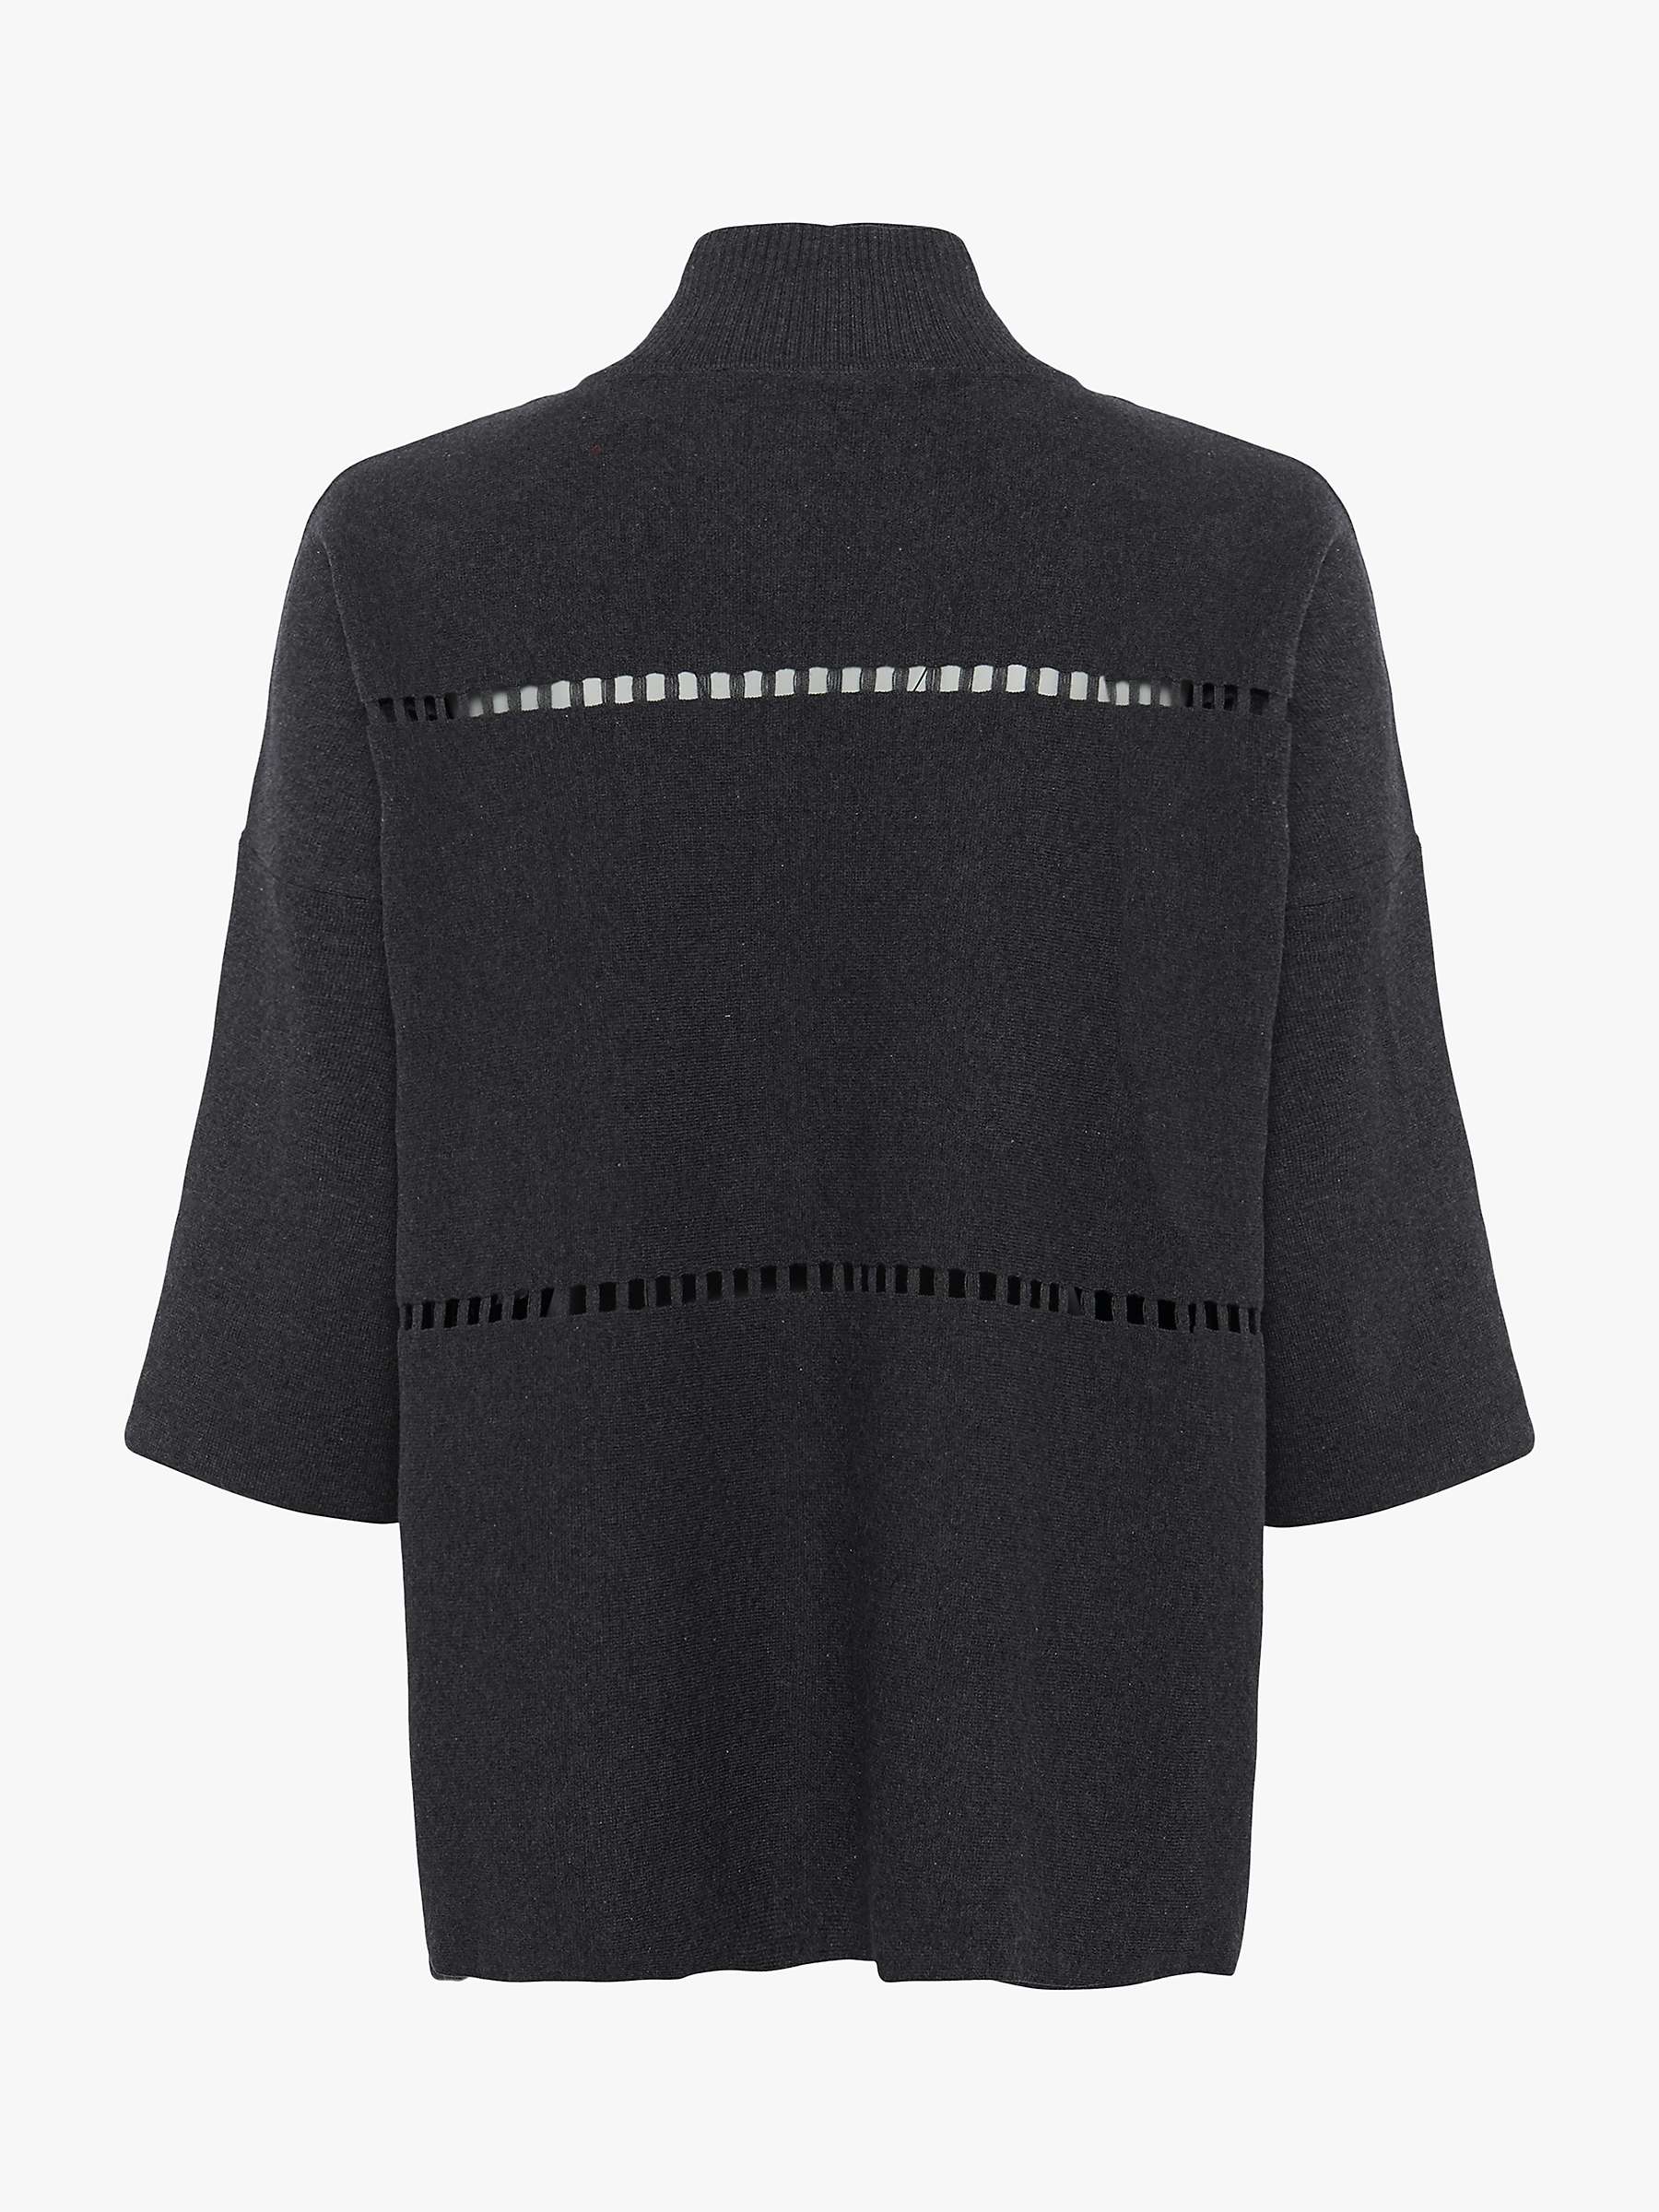 Buy French Connection Milano Cut Out High Neck Top, Charcoal Melange Online at johnlewis.com